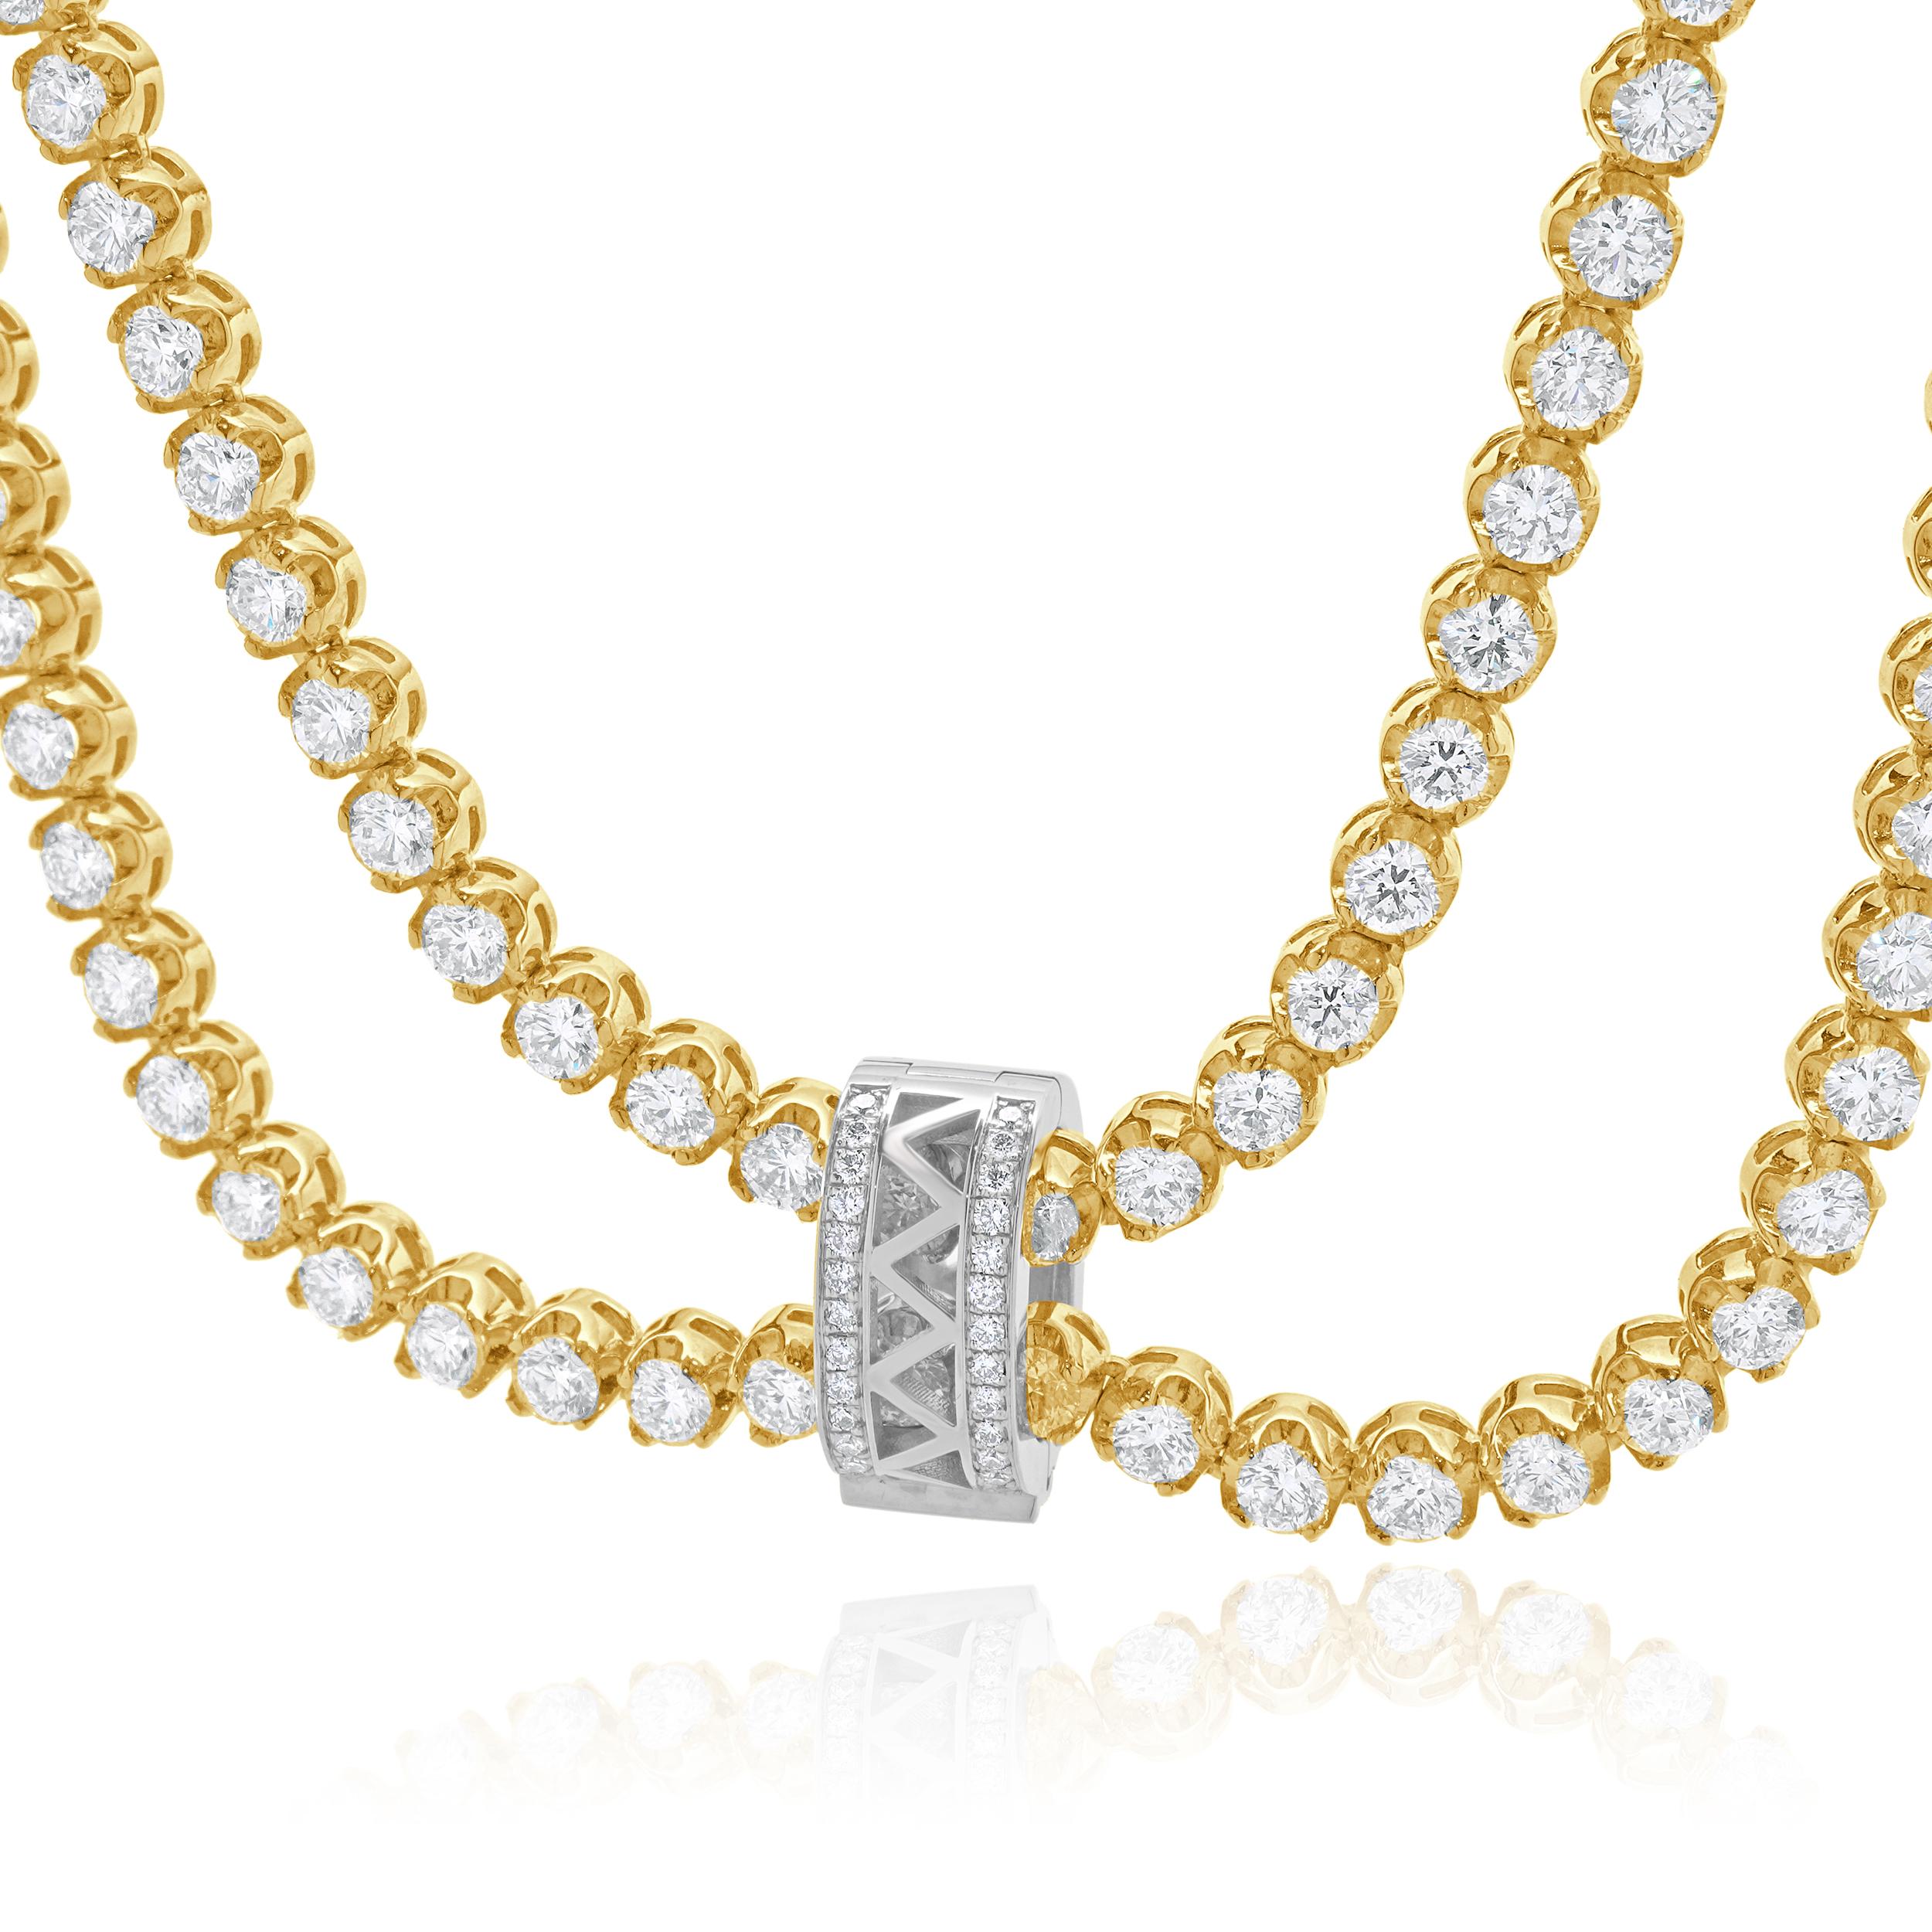 Designer: custom
Material: 14K yellow gold
Diamonds: 246 round brilliant cut = 40.32cttw
Color: G
Clarity: VS- SI1
Dimensions: necklace measures 18-inches in length 
Weight: 89.00 grams